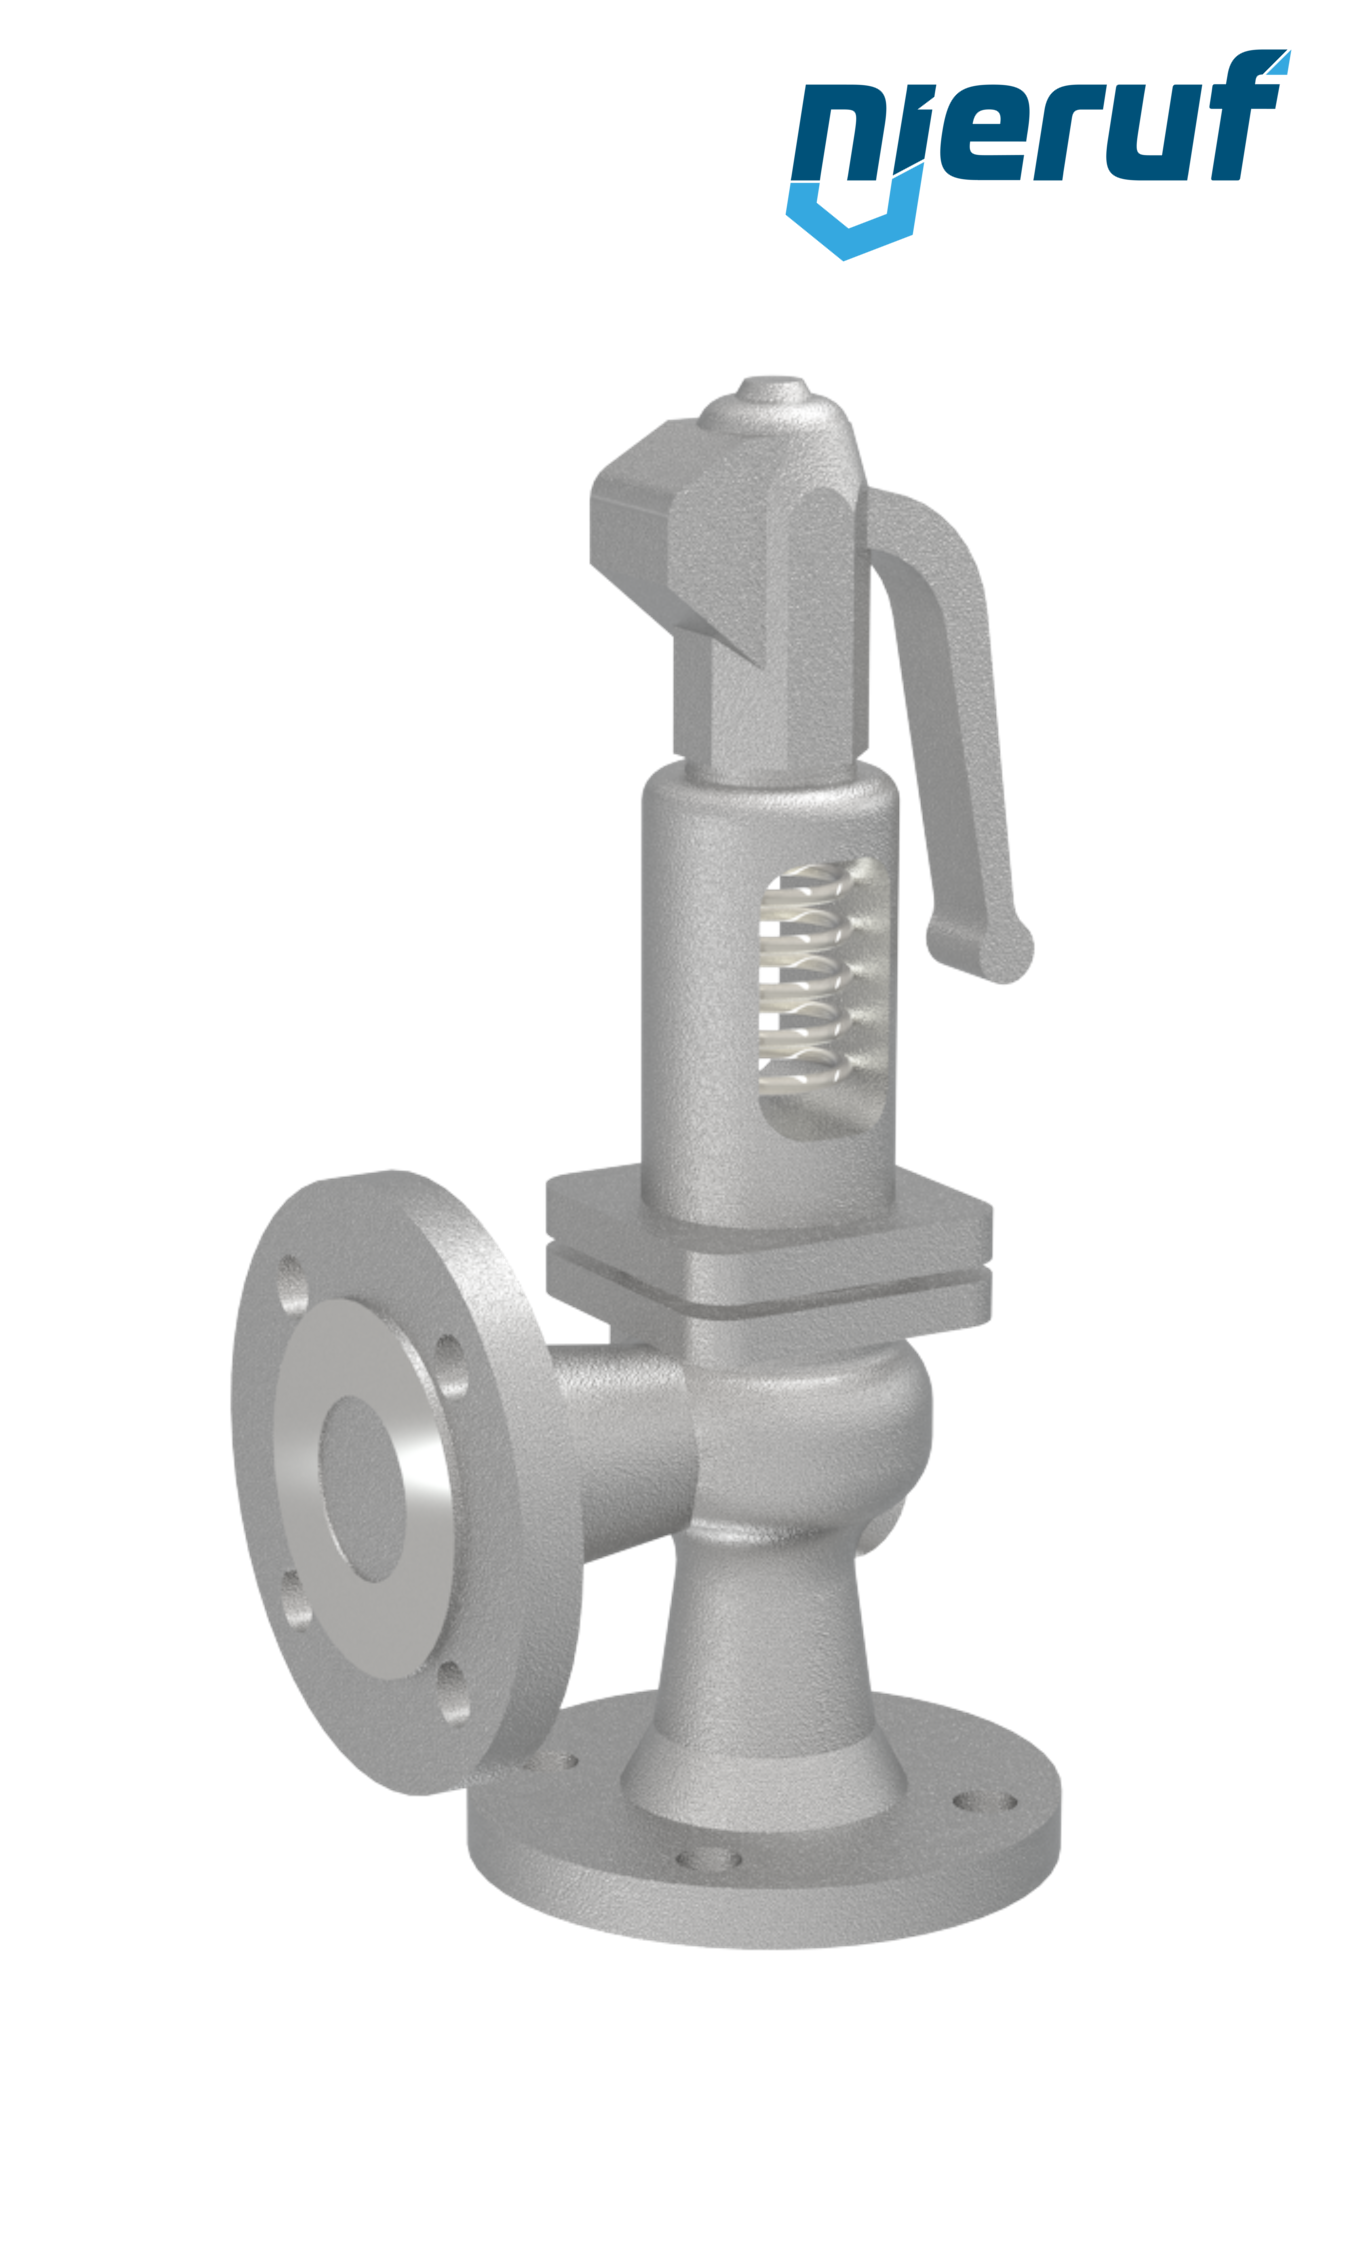 flange-safety valve DN20/DN20 SF0202, cast steel EPDM, with lever